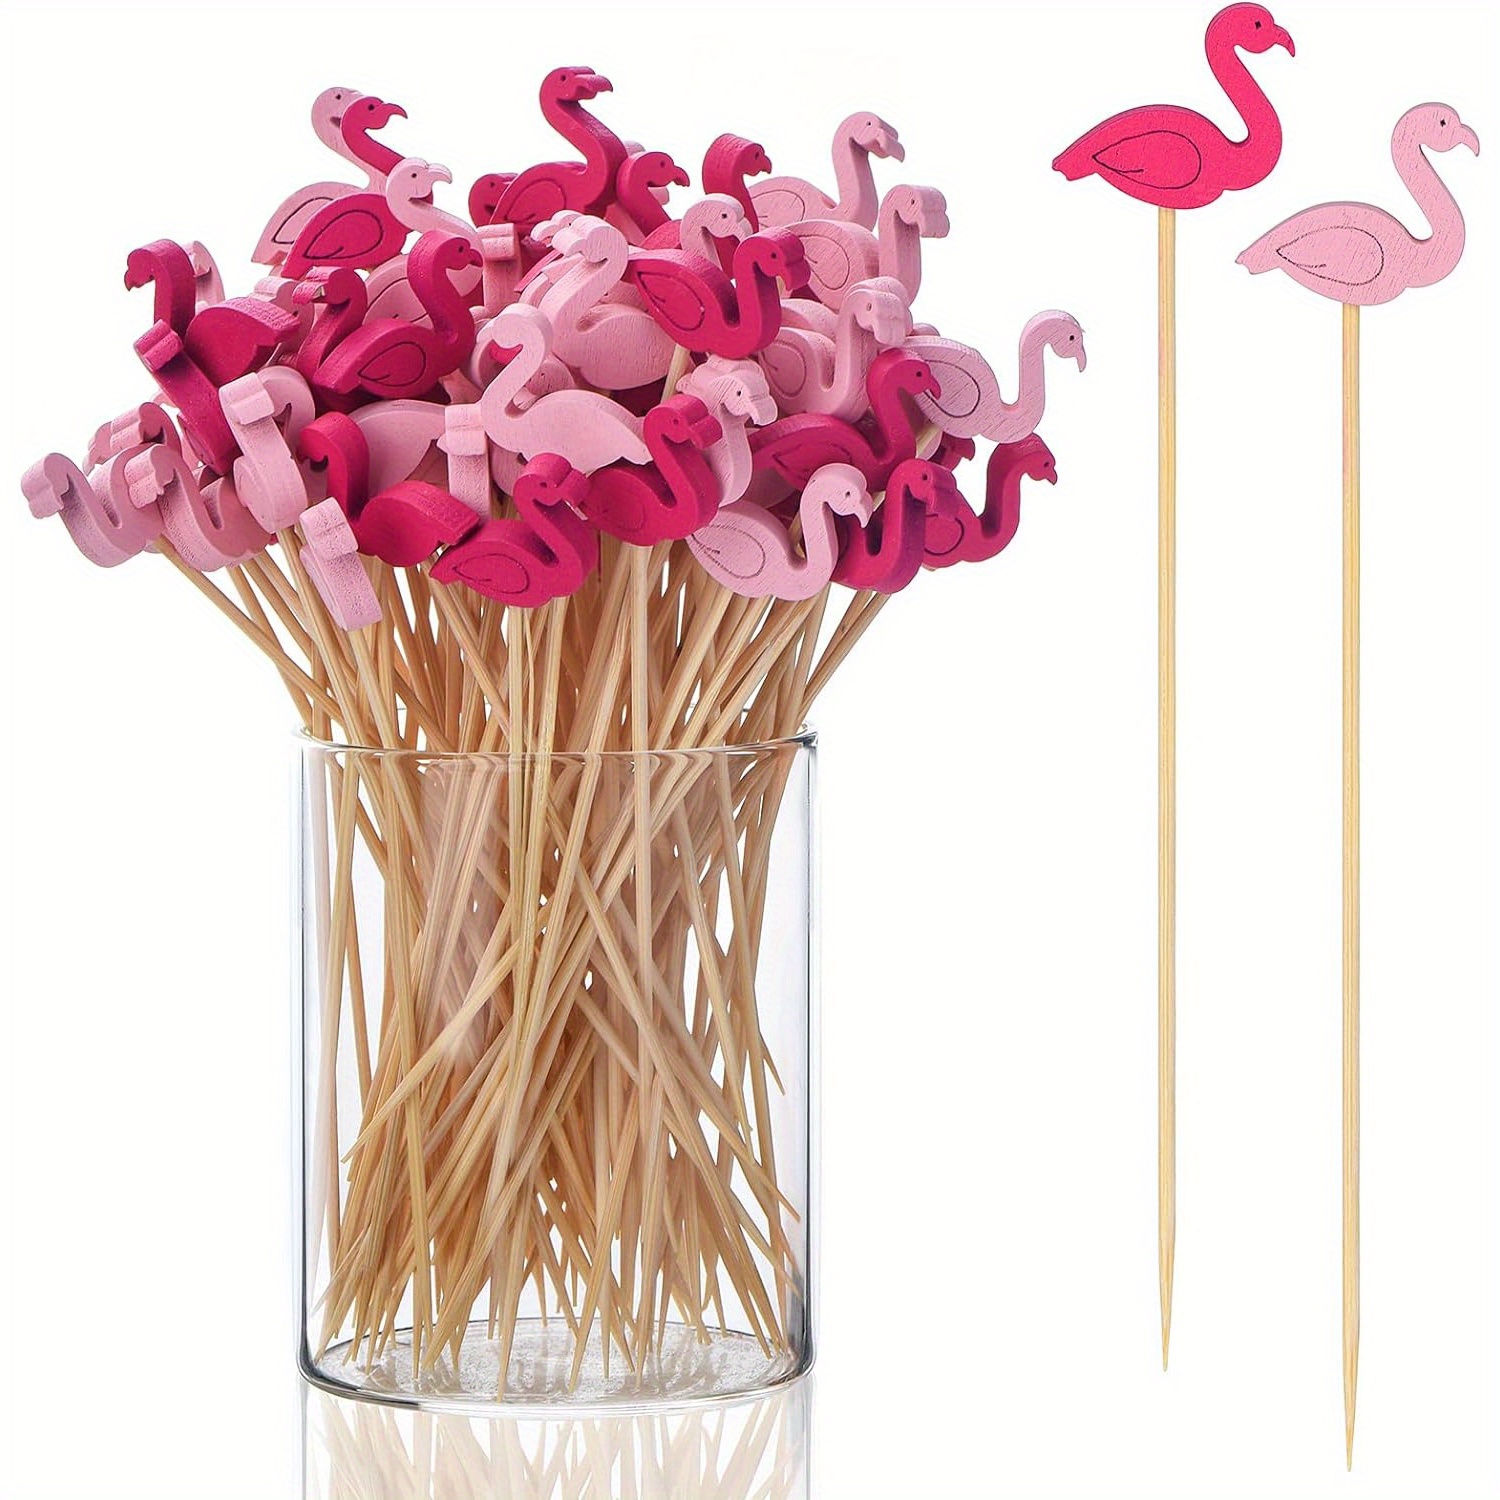 

100pcs, Flamingo Decorative Toothpicks For Appetizers, 4.7 Inch Long Bamboo Skewers Wooden Sticks For Food And Drinks, Fancy Party Decorations